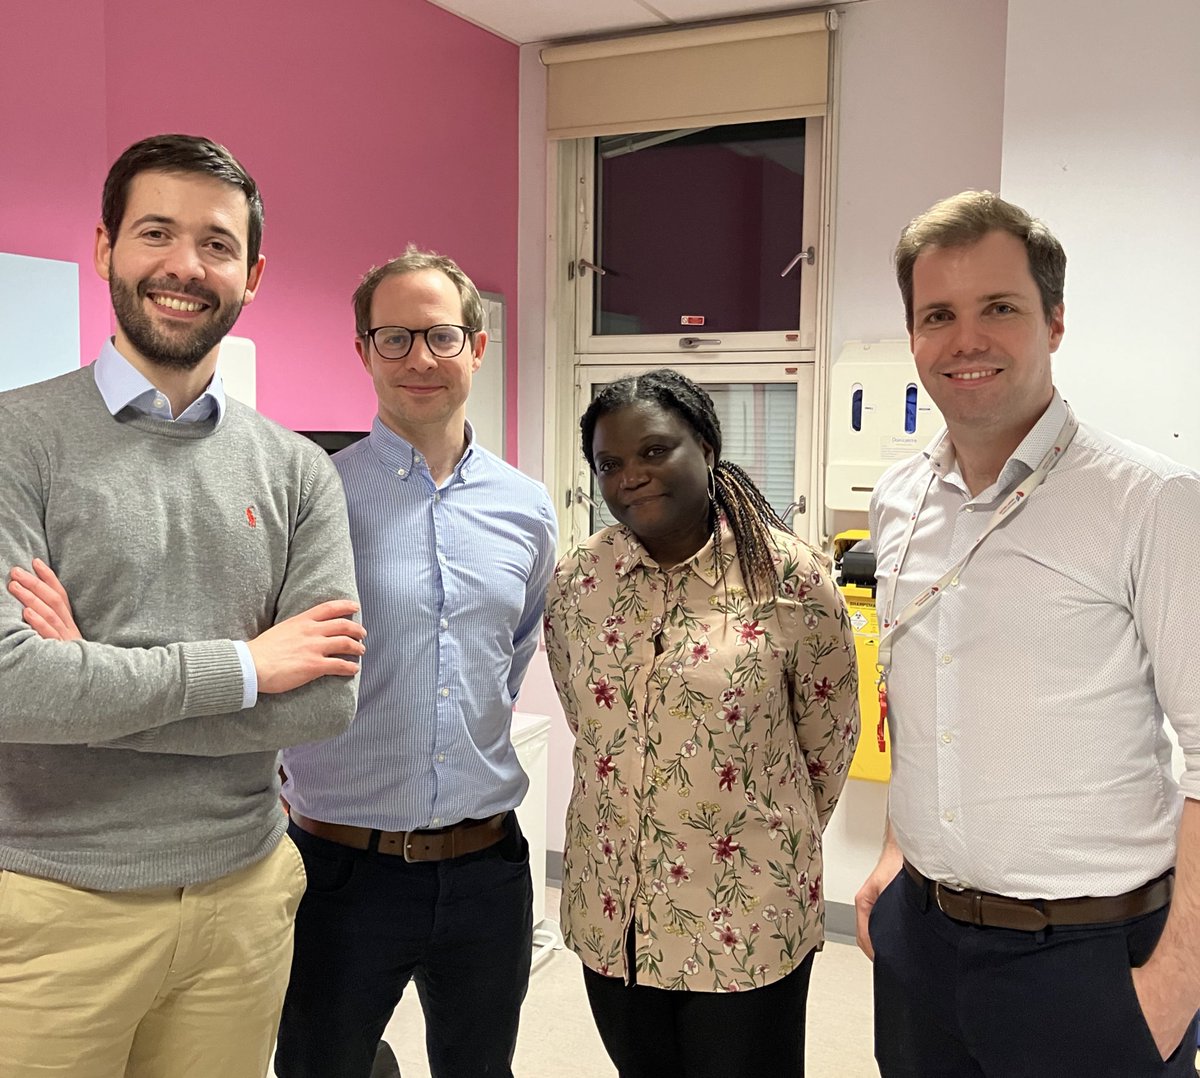 V special day for #cardiomyopathy team and patients at @KingsCollegeNHS. Opening of @CVGenomics SMARTER-CM (Genetics, Imaging and Artificial Intelligence for Precision Care in Cardiomyopathy)! 4 recruited; 100% take up! Thanks to Ed, Namakau, Dan, @KCH_Research and our patients!